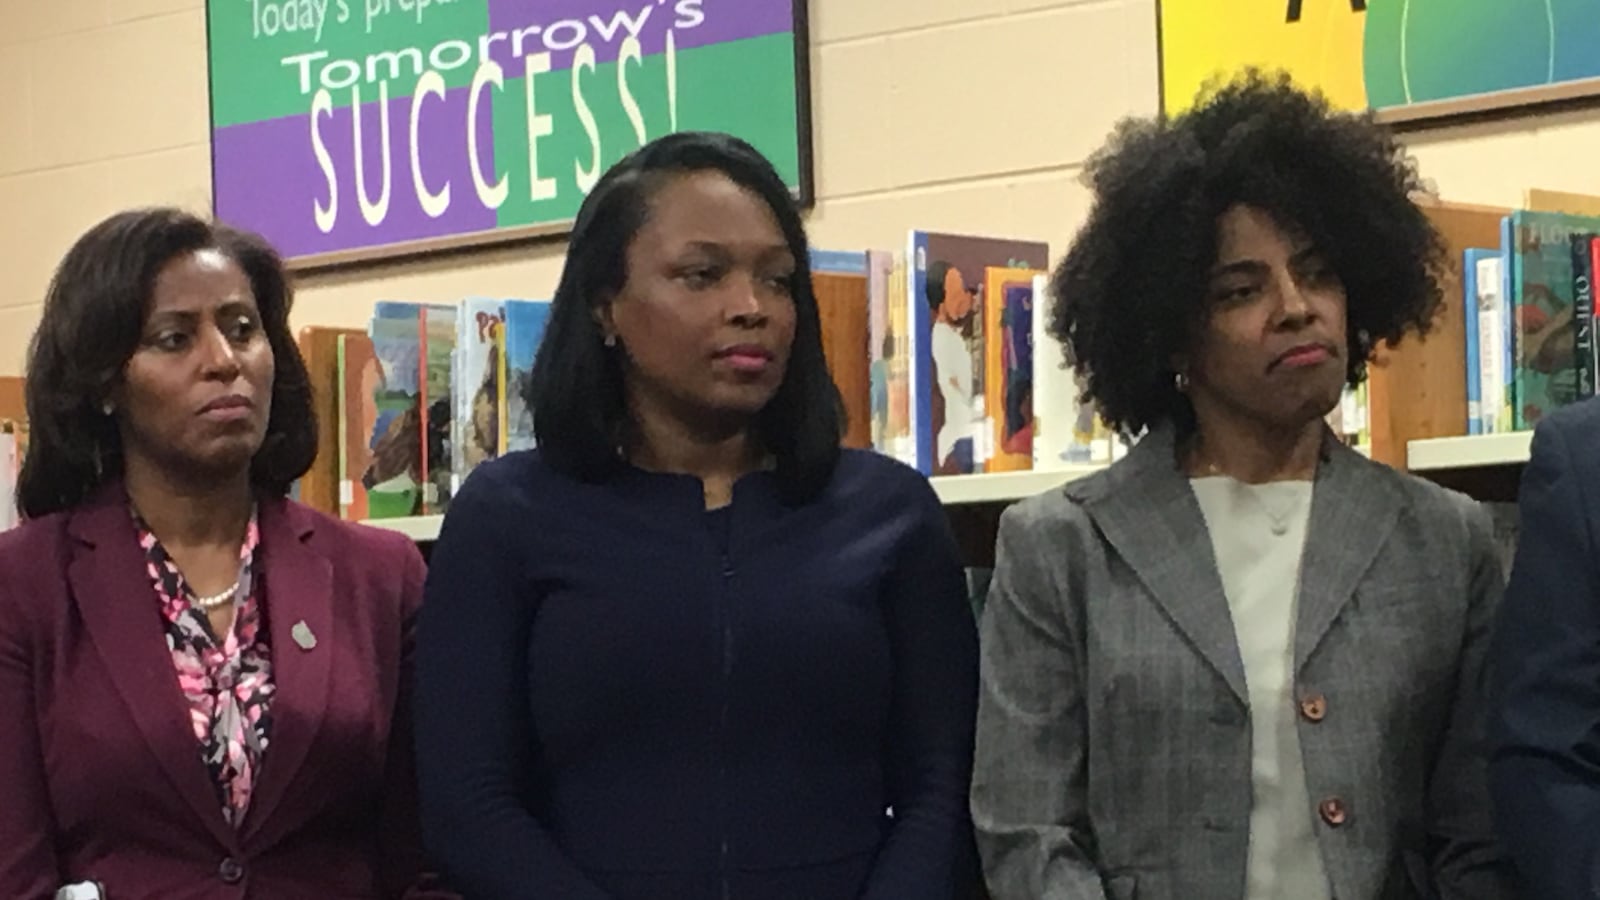 Chicago’s new deputy mayor for education and human services, Sybil Madison (third from left) stands with schools CEO Janice Jackson (center) and chief academic officer LaTanya McDade at a press conference announcing her appointment June 3, 2019.